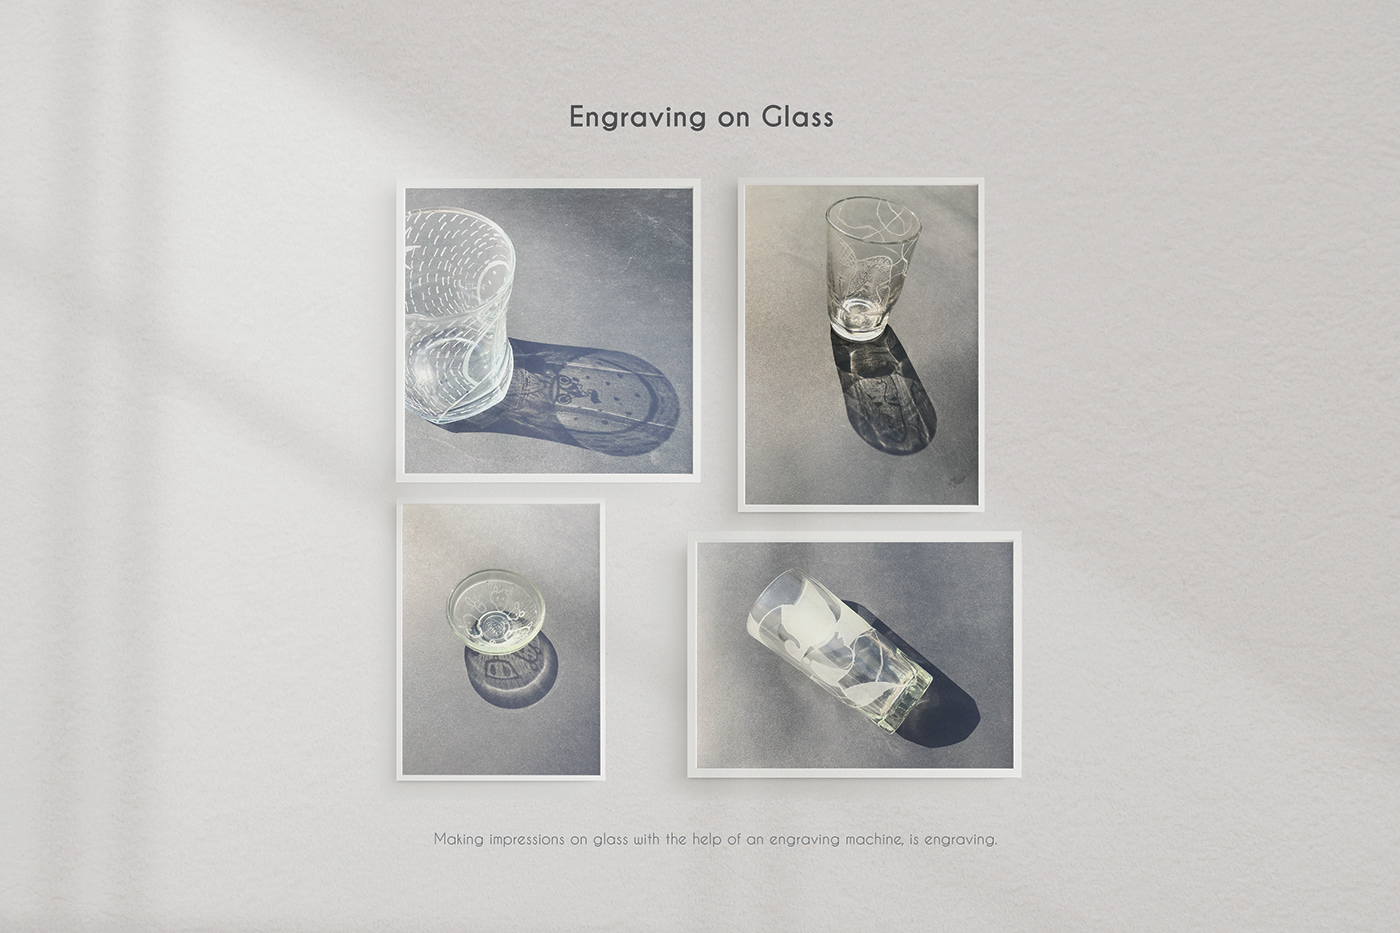 CLEAR GLASS engraving etching glass Kiln slumping stained glass waste management